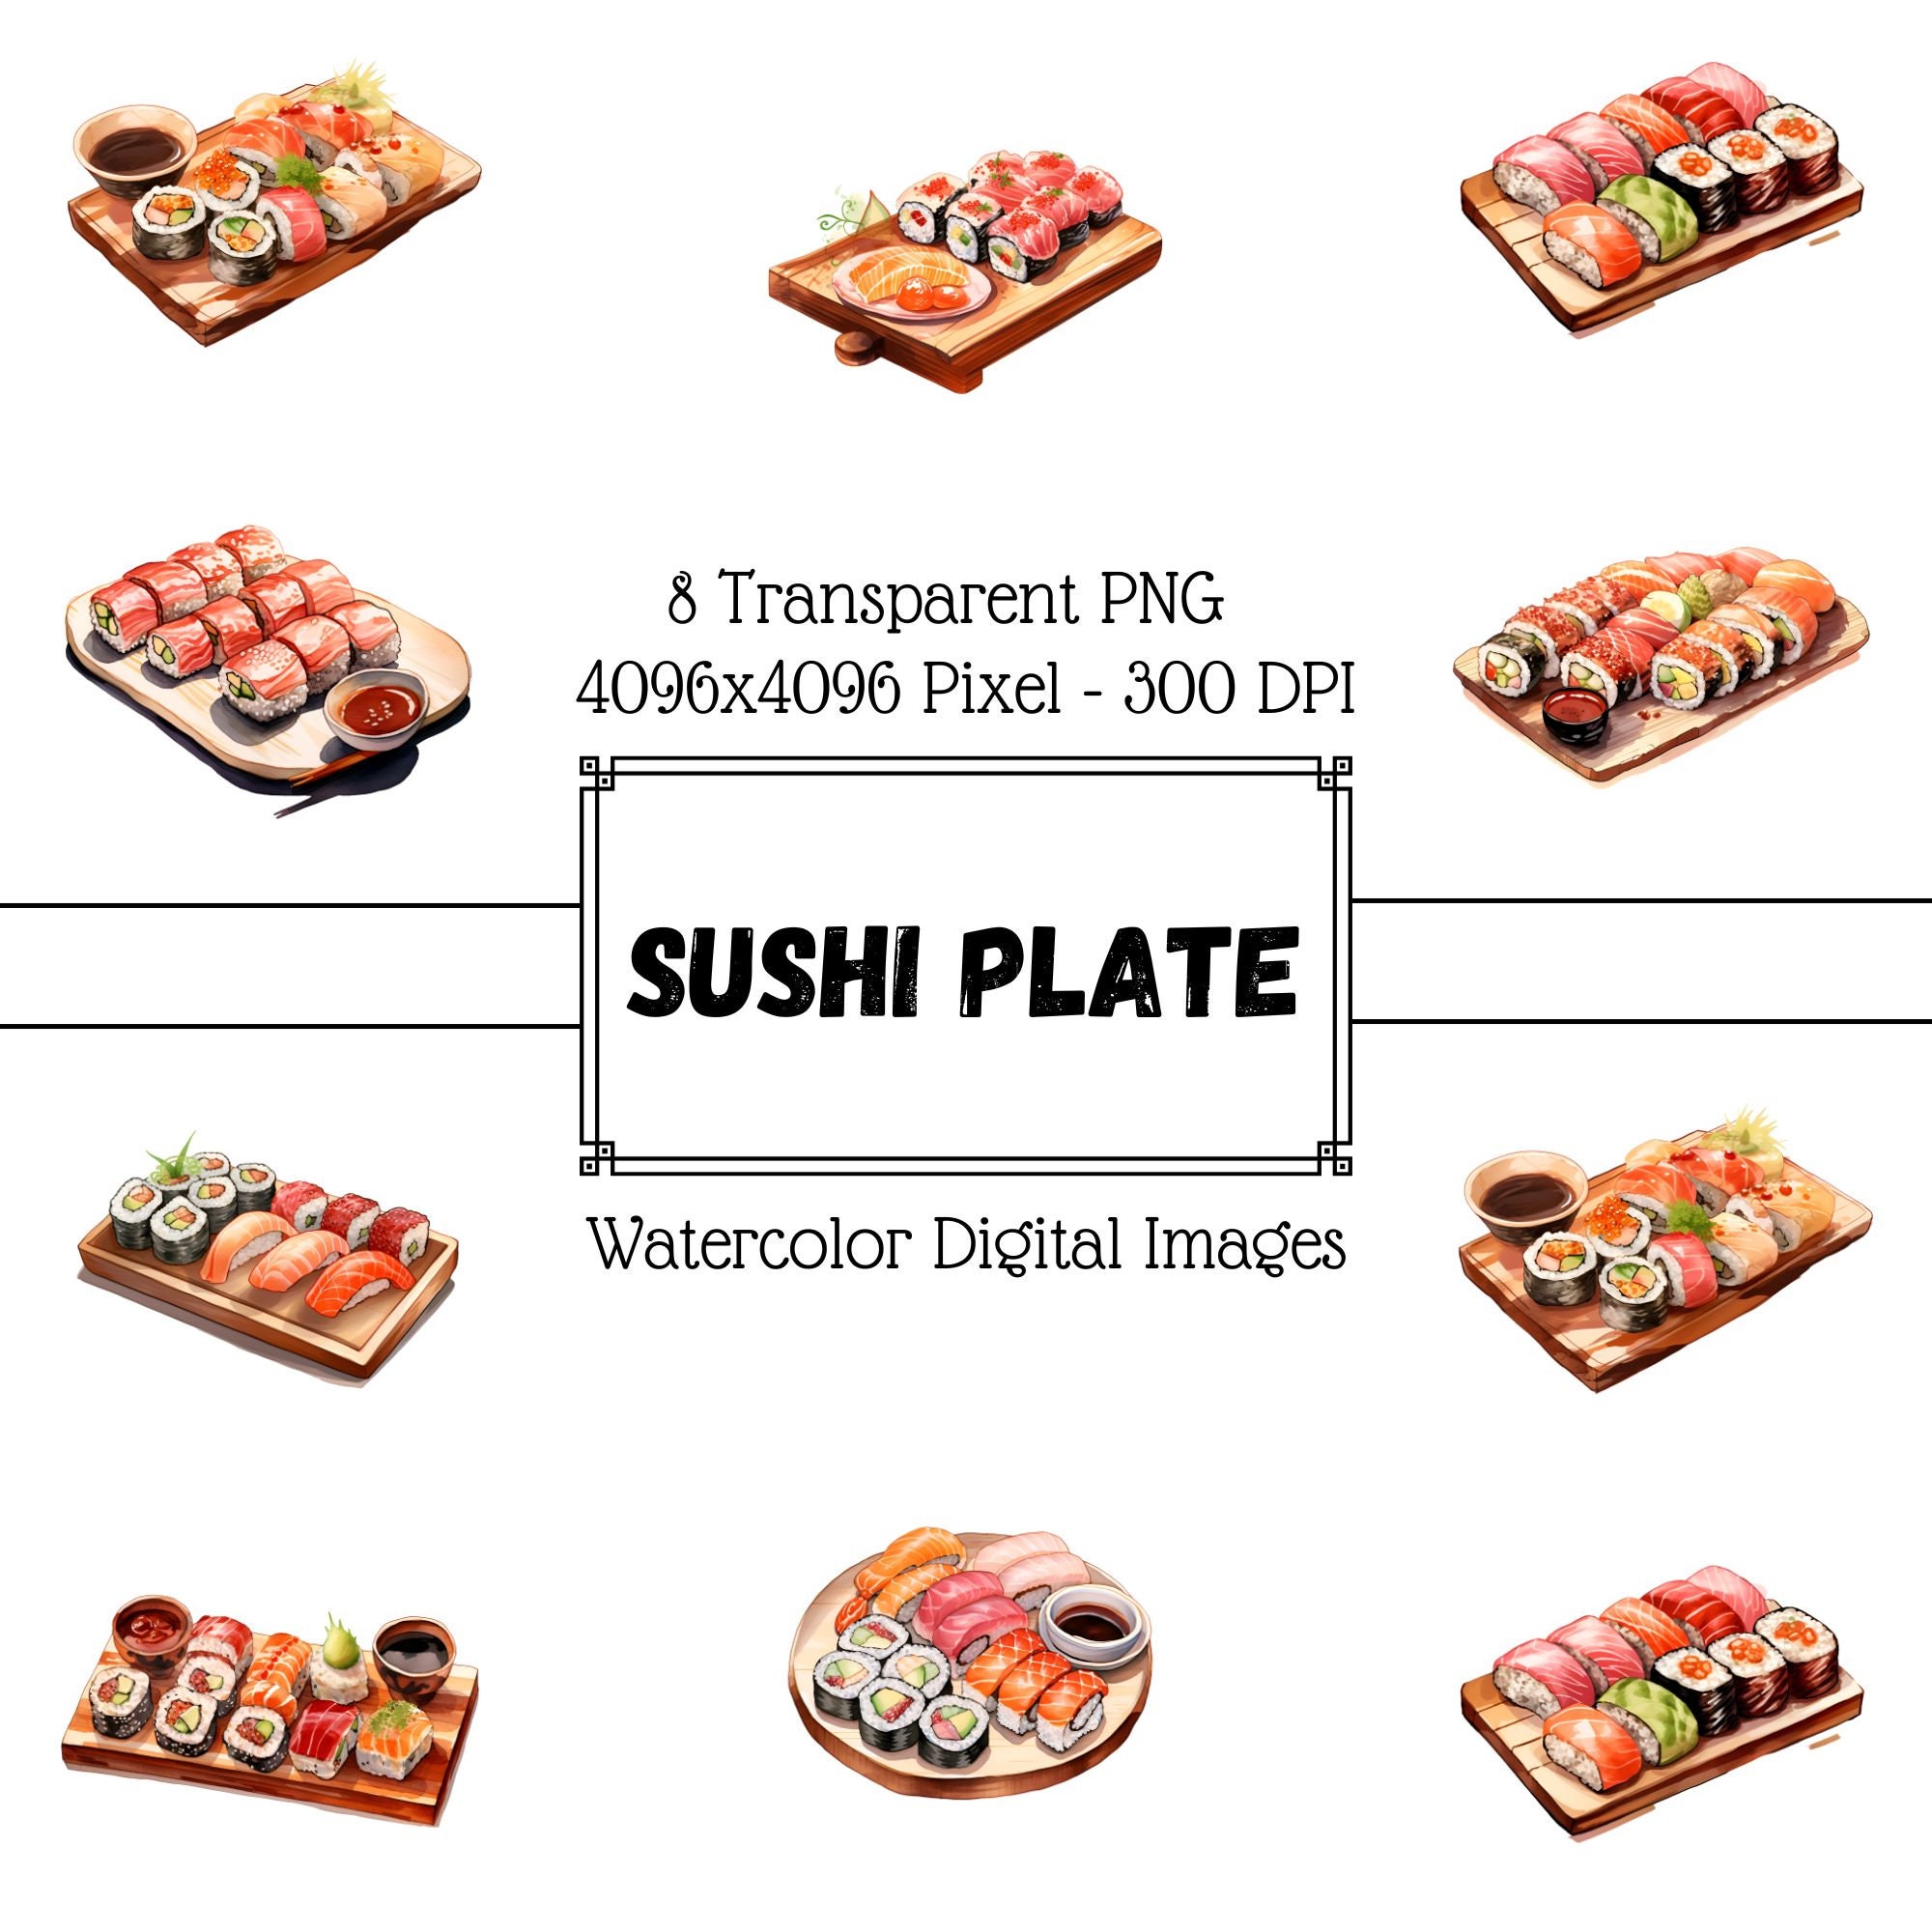 Complete Sushi Kit by Hinkler, Other Format